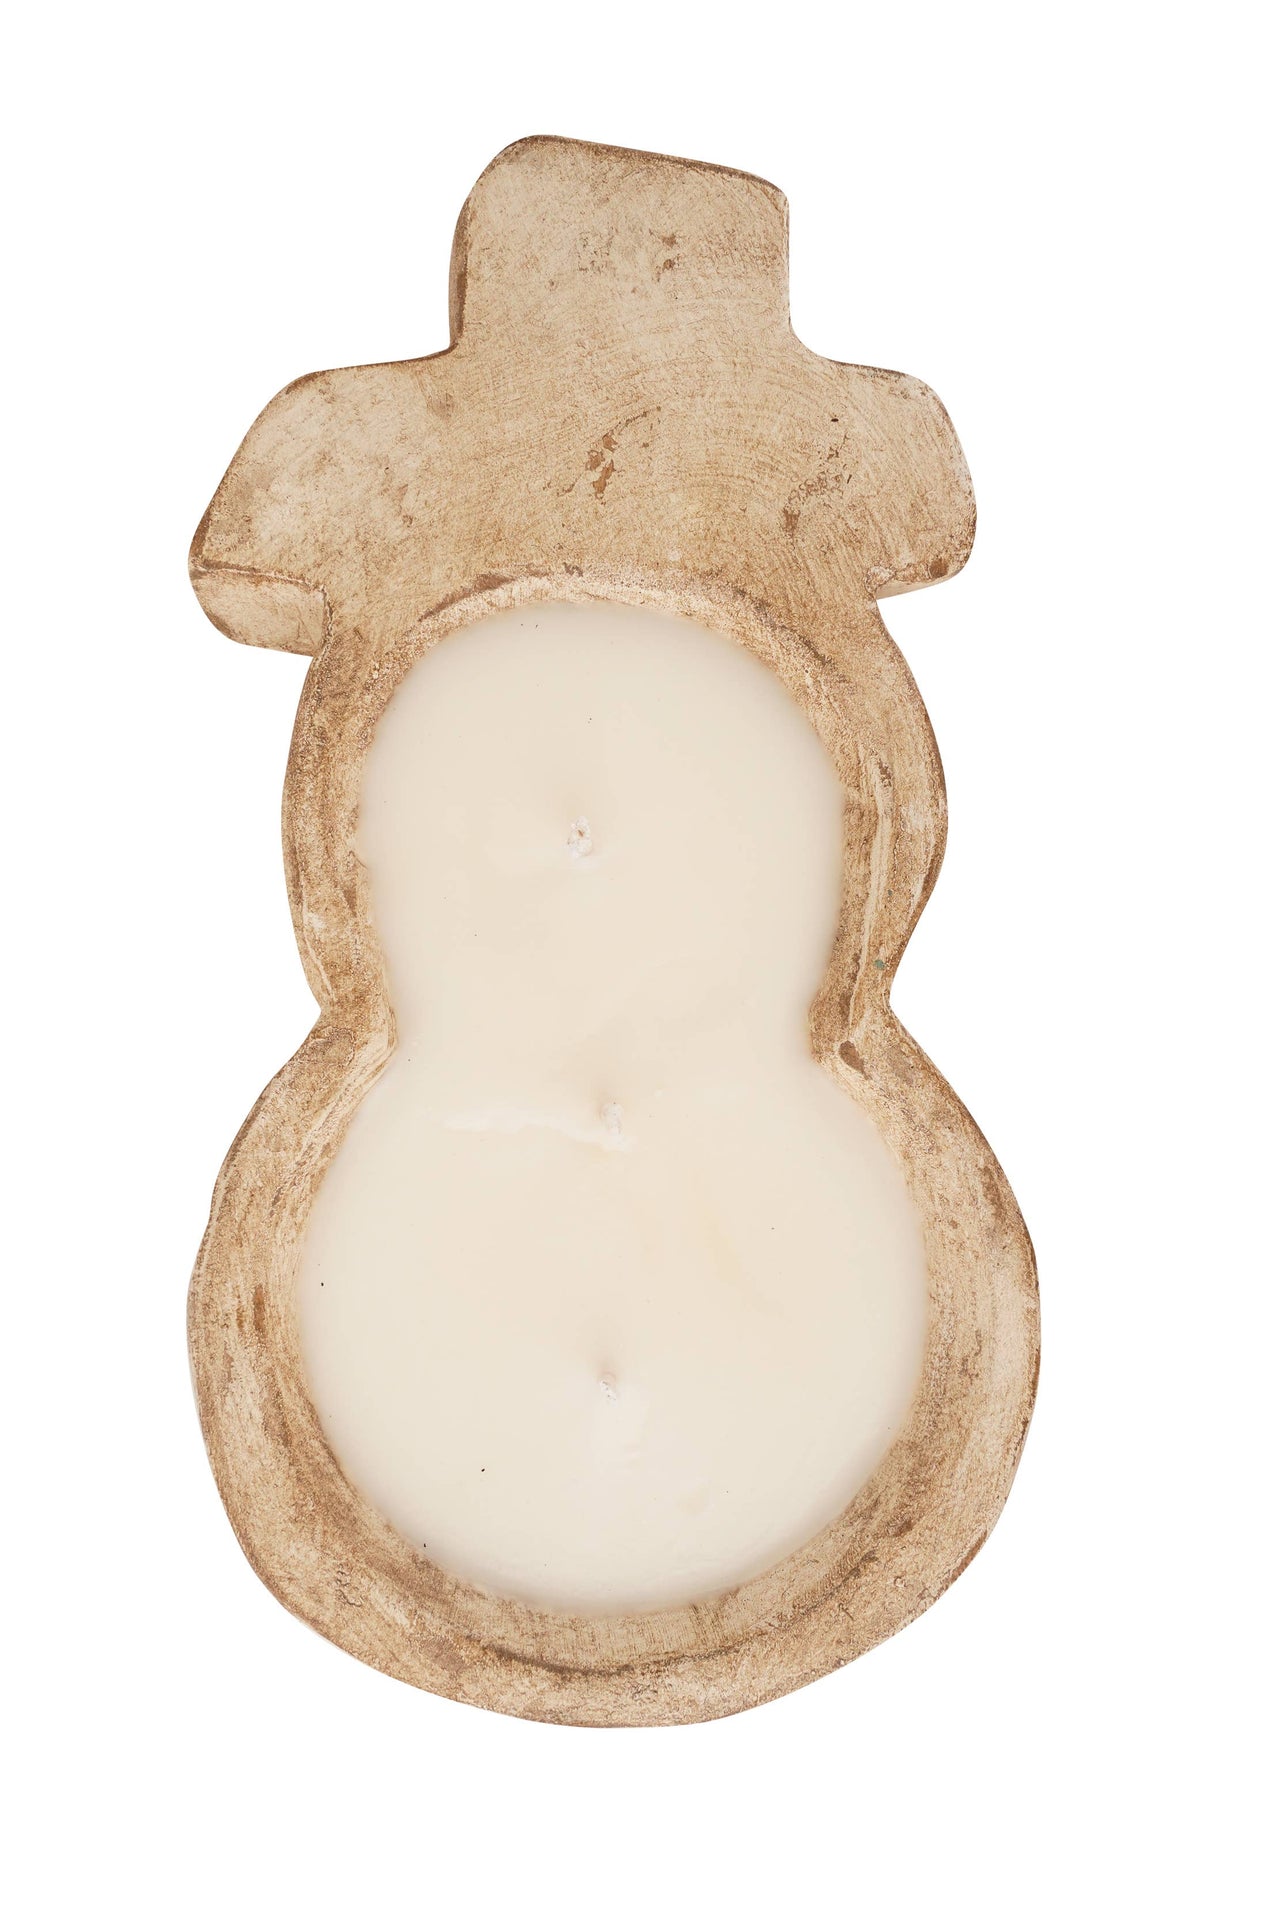 Snowman-Farmhouse-Candle Ready Dough Bowl-6x12 inches-Small: Traditional Color